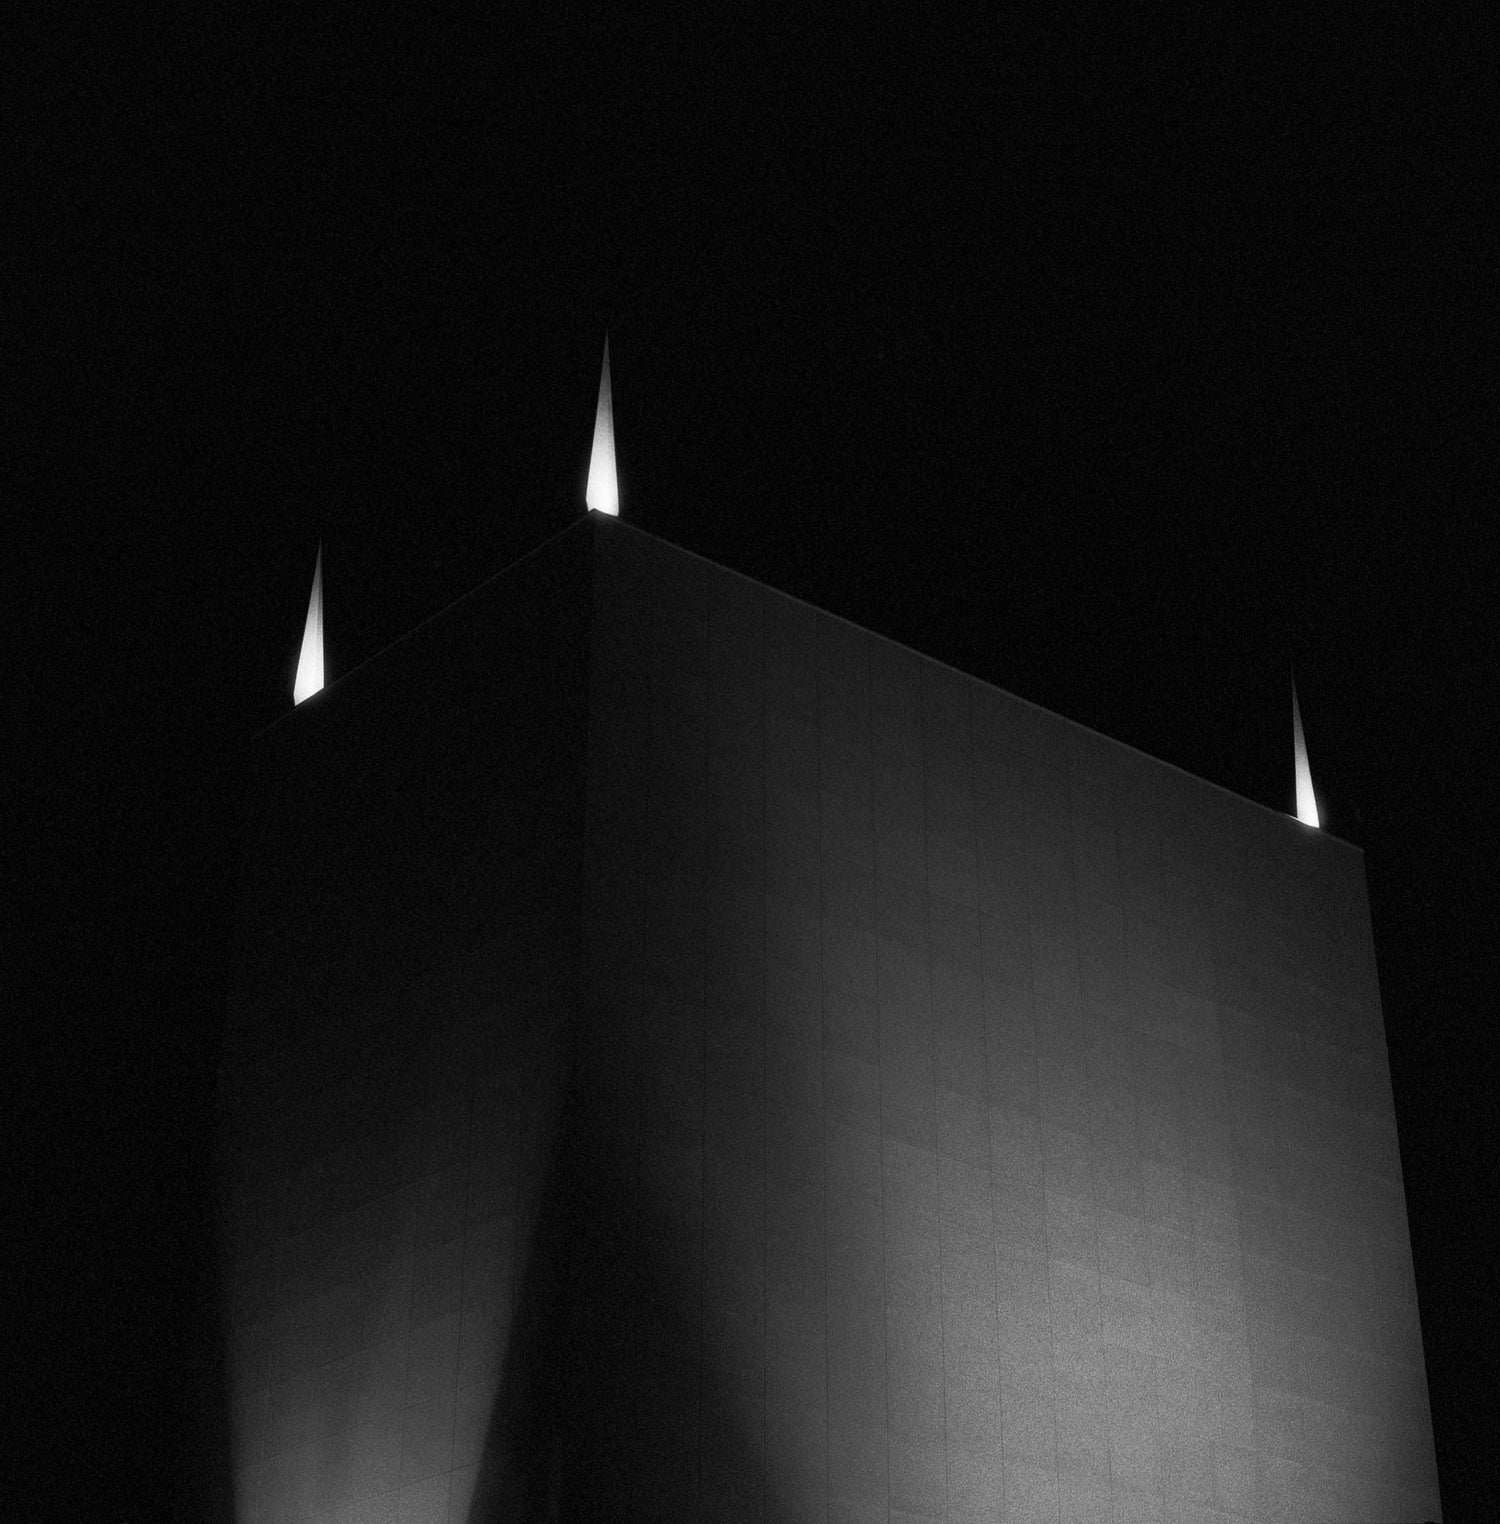 The artwork 'Concrete #1' by Jildo Tim Hof showing a dimly lit concrete building with beams of light going up from the roof